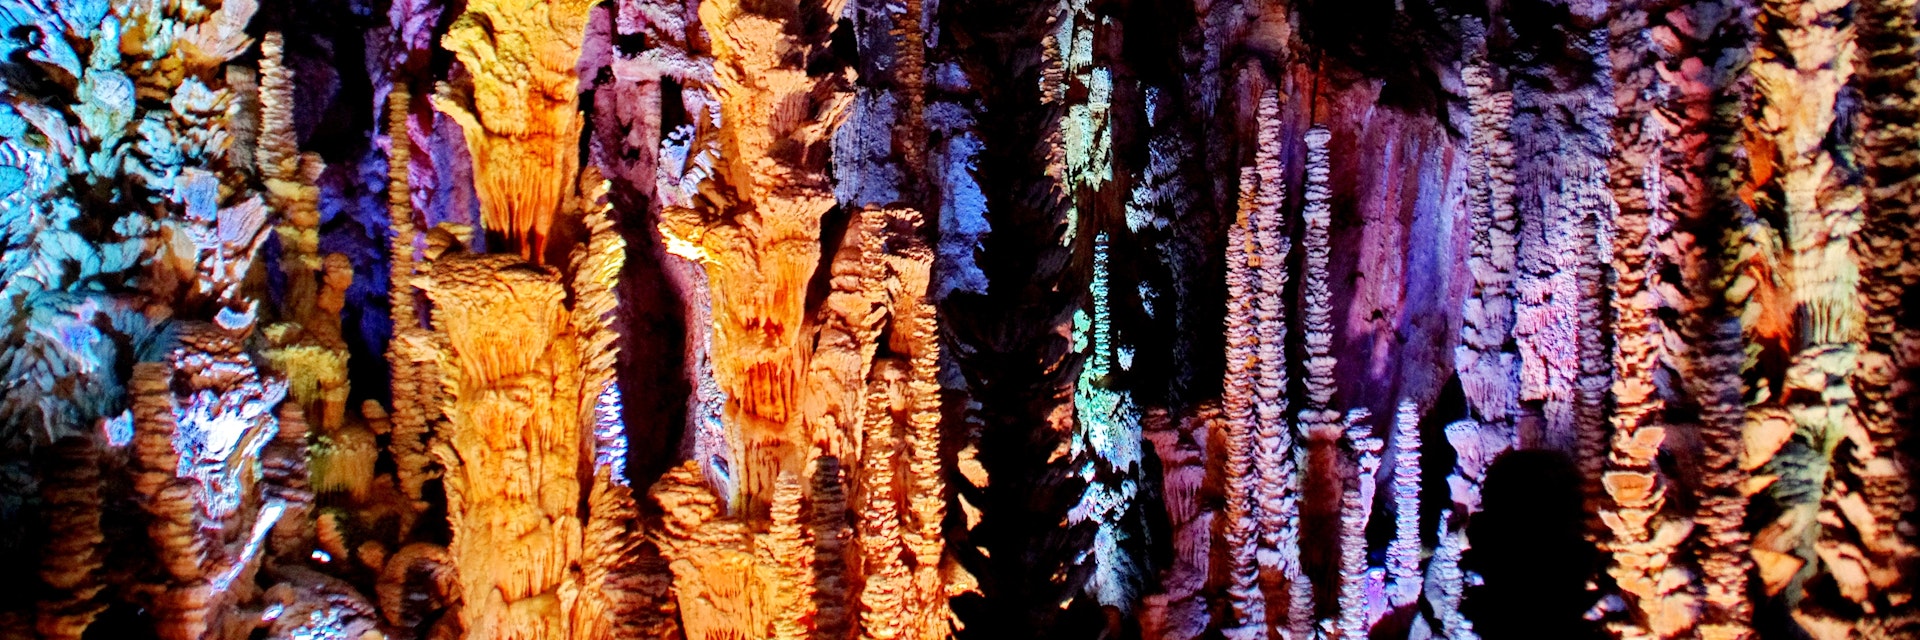 Stalactites and stalagmites lit with multicolored lights in the Aven Armand cave.